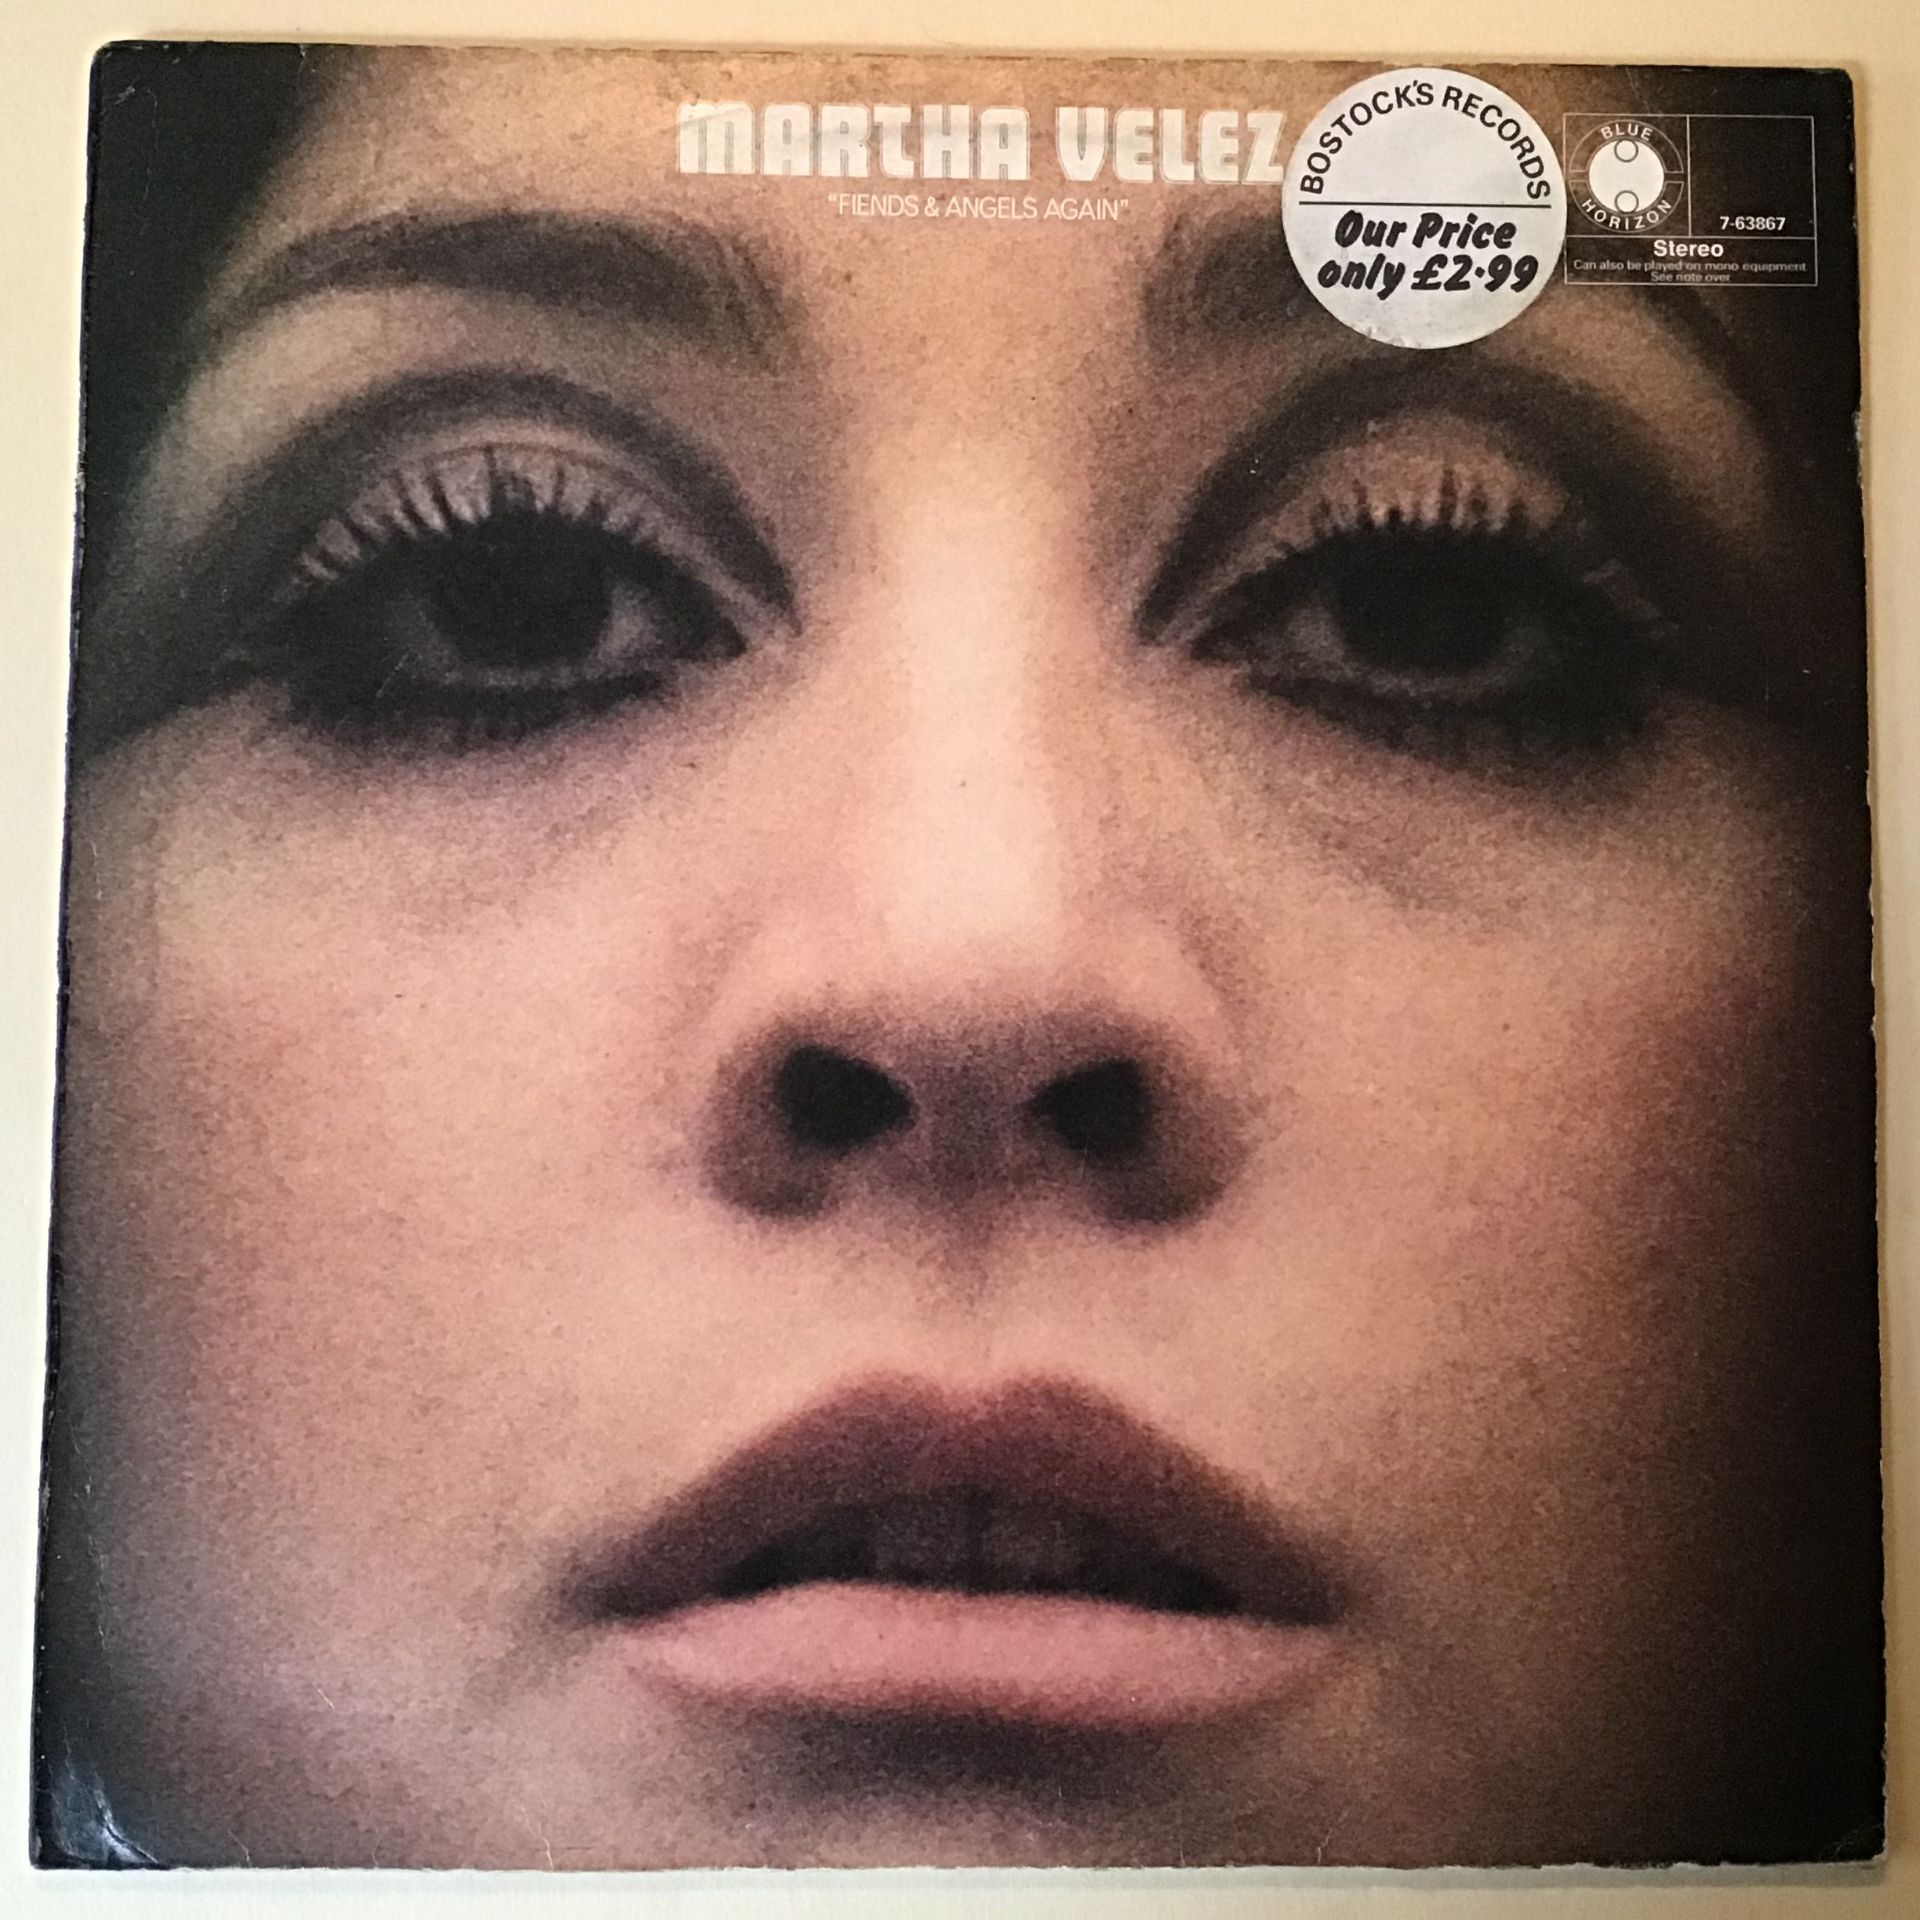 MARTHA VELEZ LP 'FIENDS AND ANGELS AGAIN'. Here in VG+ condition is this not often seen album on